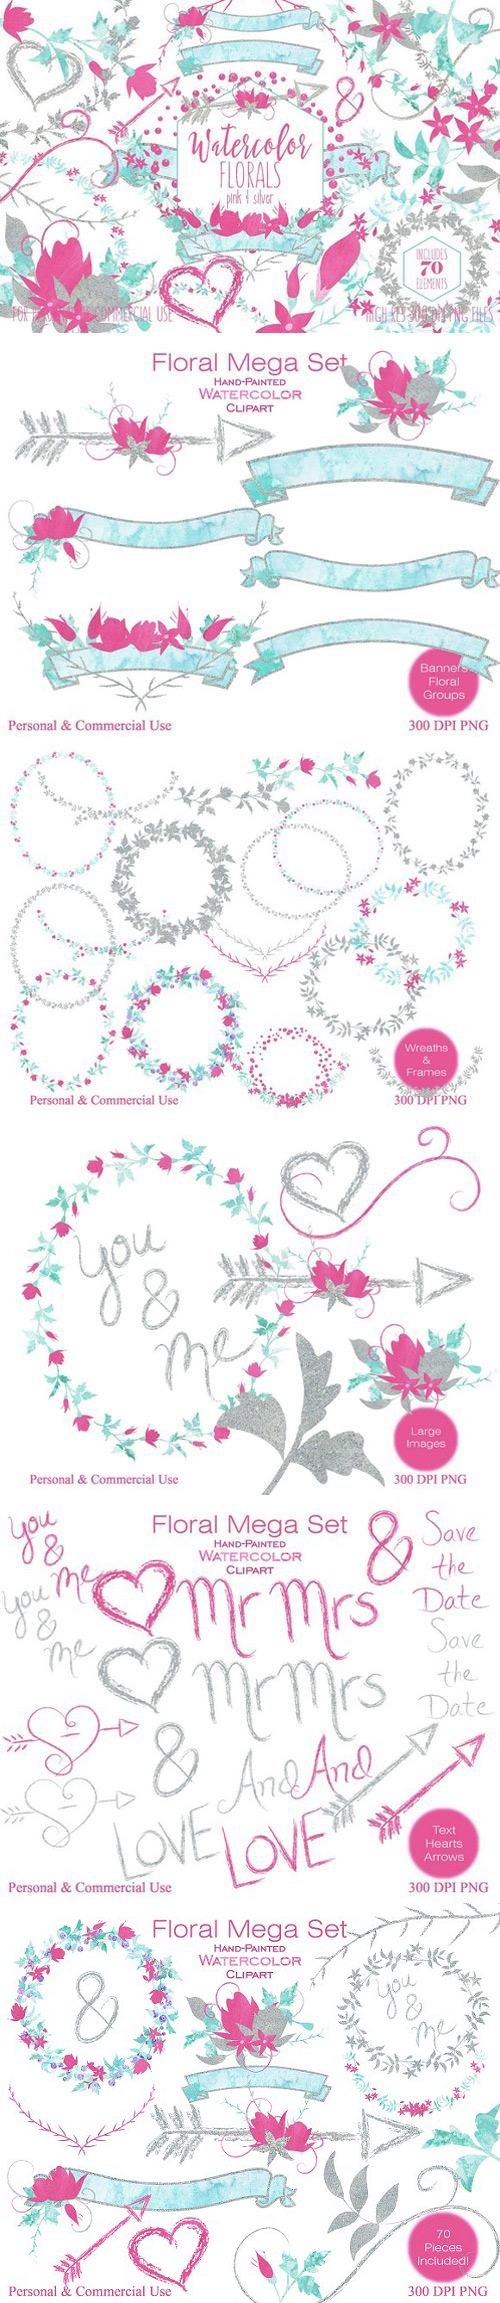 Pink & Silver Watercolor Floral Set 2176133